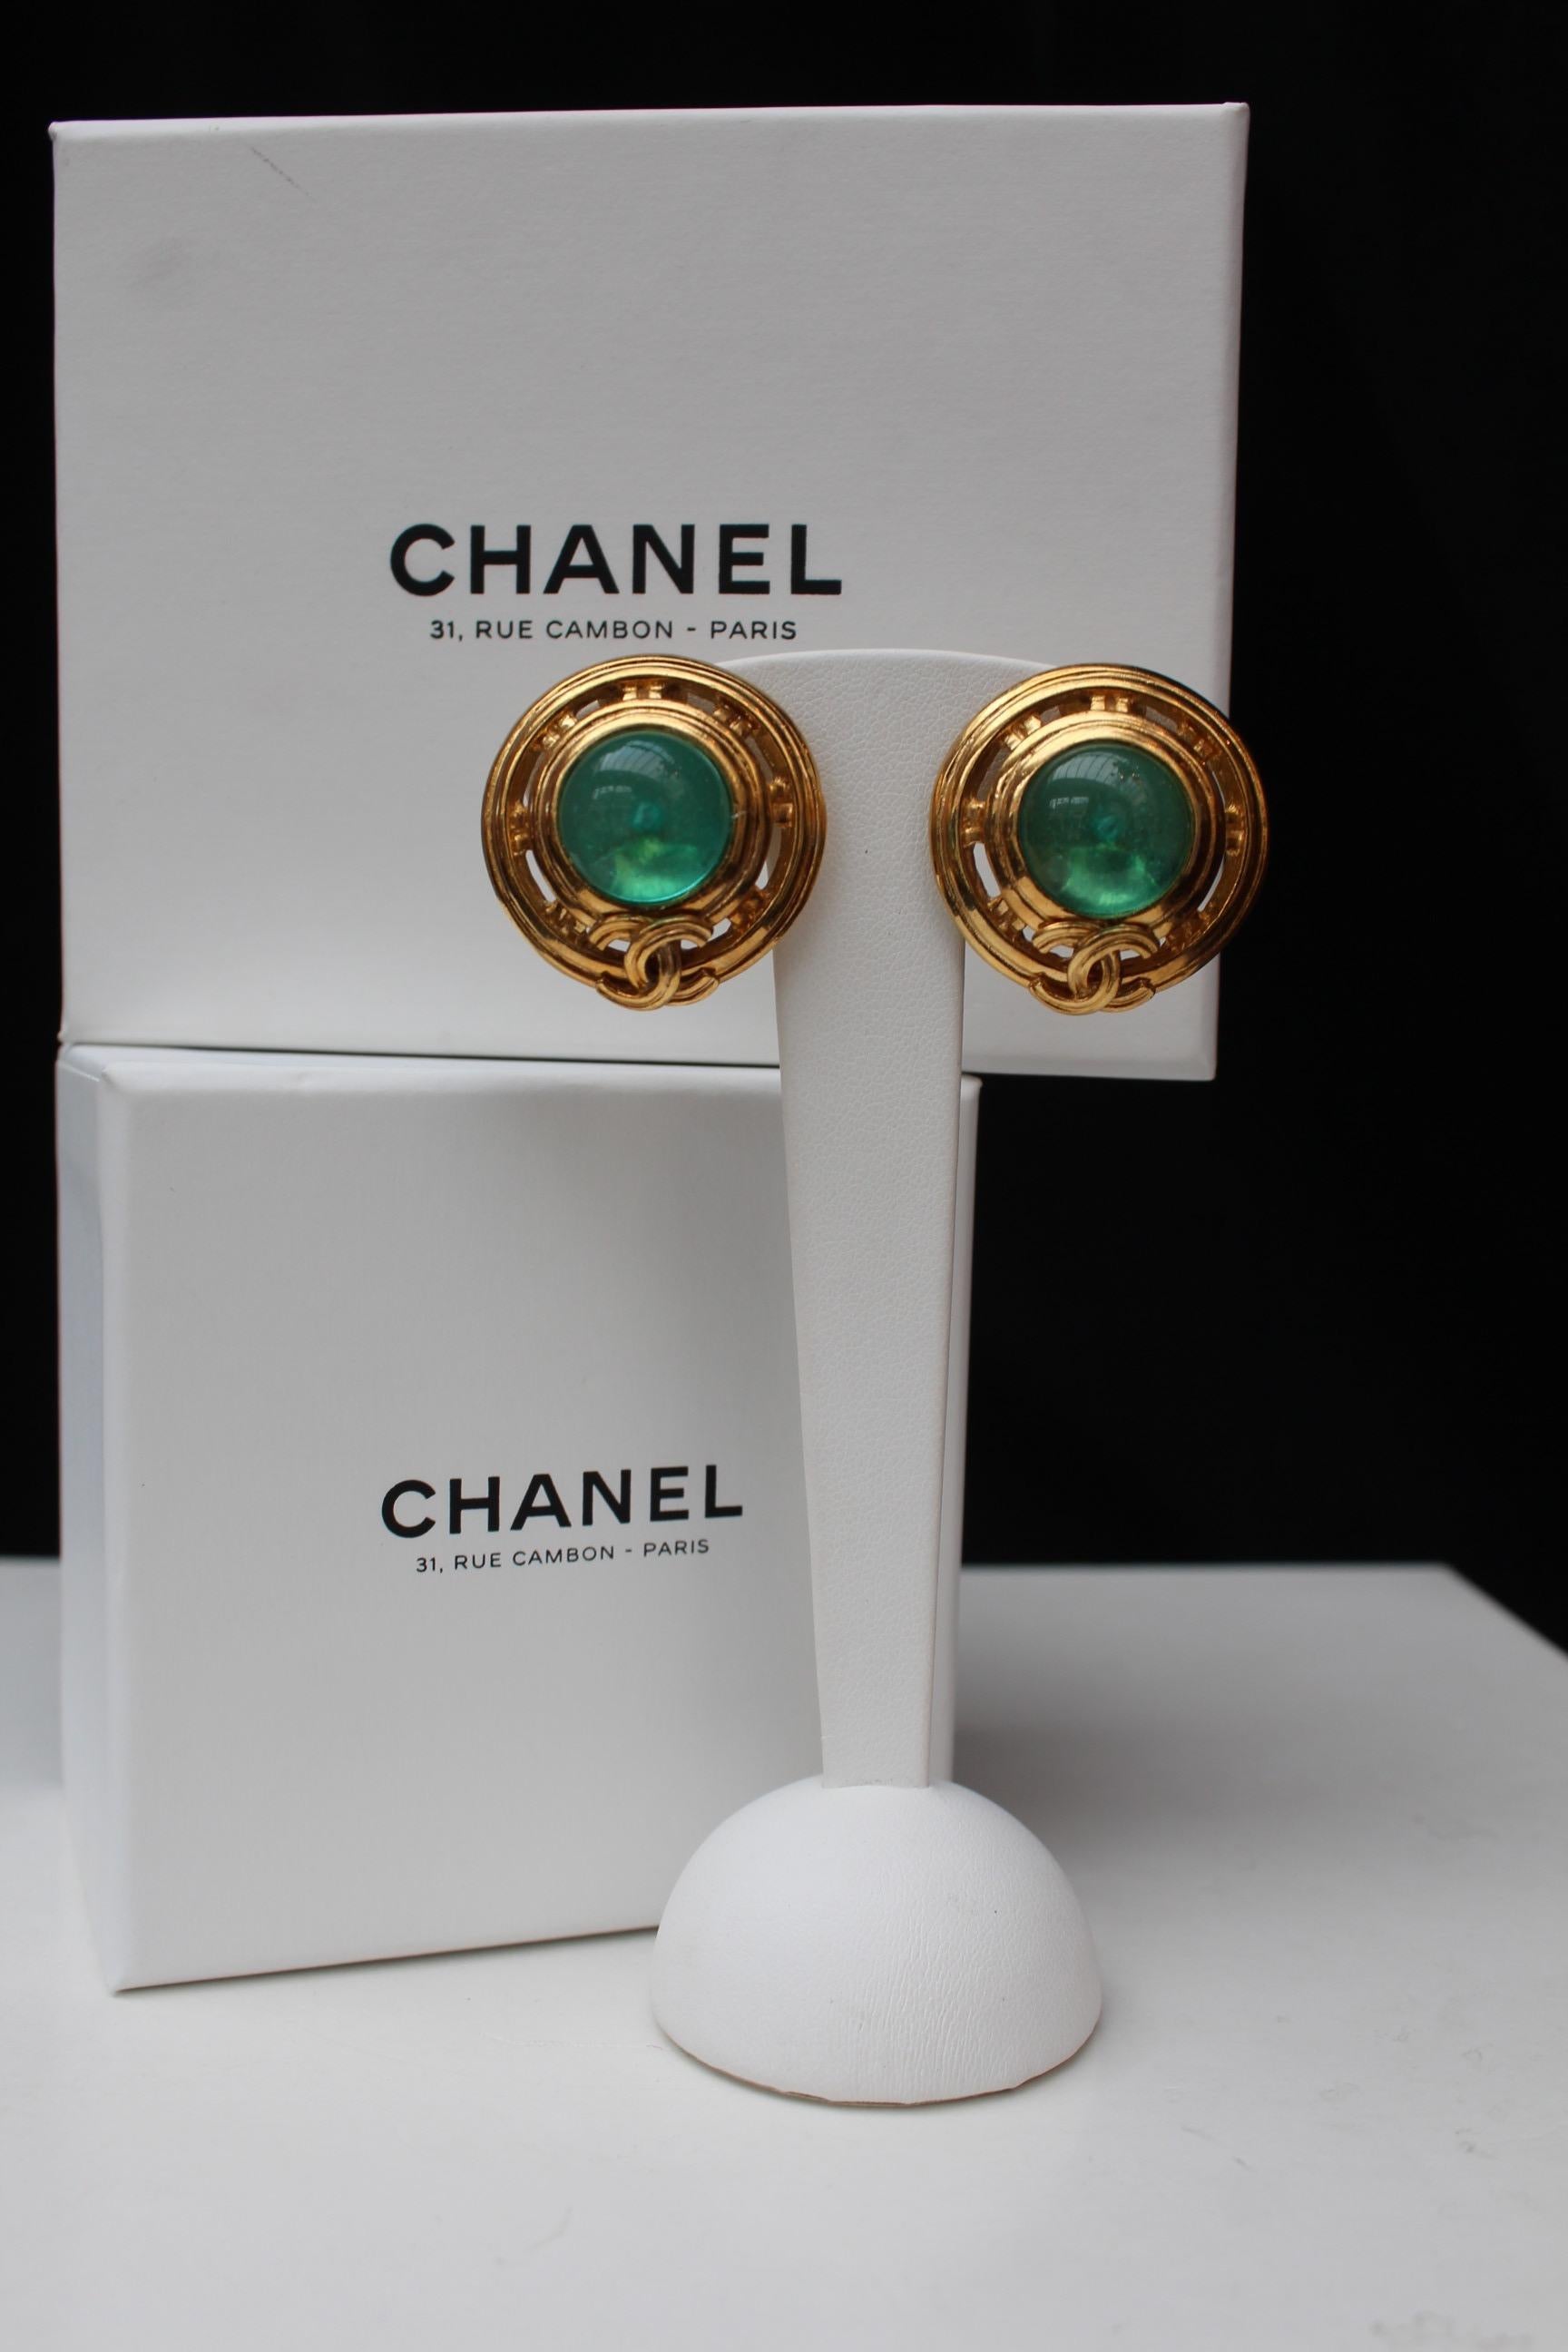 CHANEL (Made in France) Very nice vintage clip-on earrings made of openwork gilded metal, embellished with a central cabochon in light green glass paste, and a small CC logo at the bottom. Signed at the back.

1996 Spring-Summer